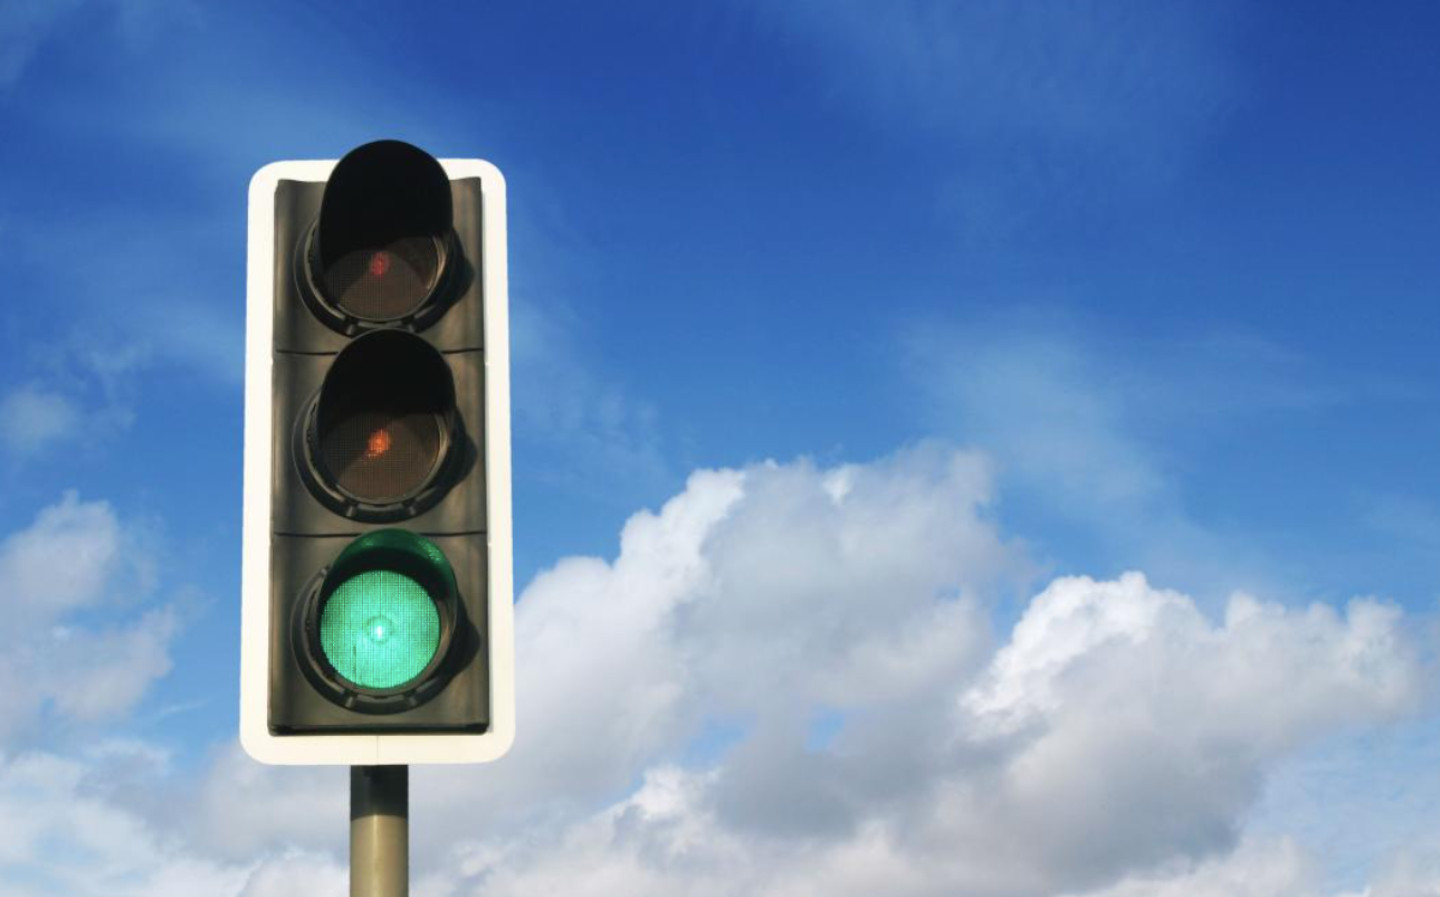 New traffic lights could spell less frequent stops for motorists